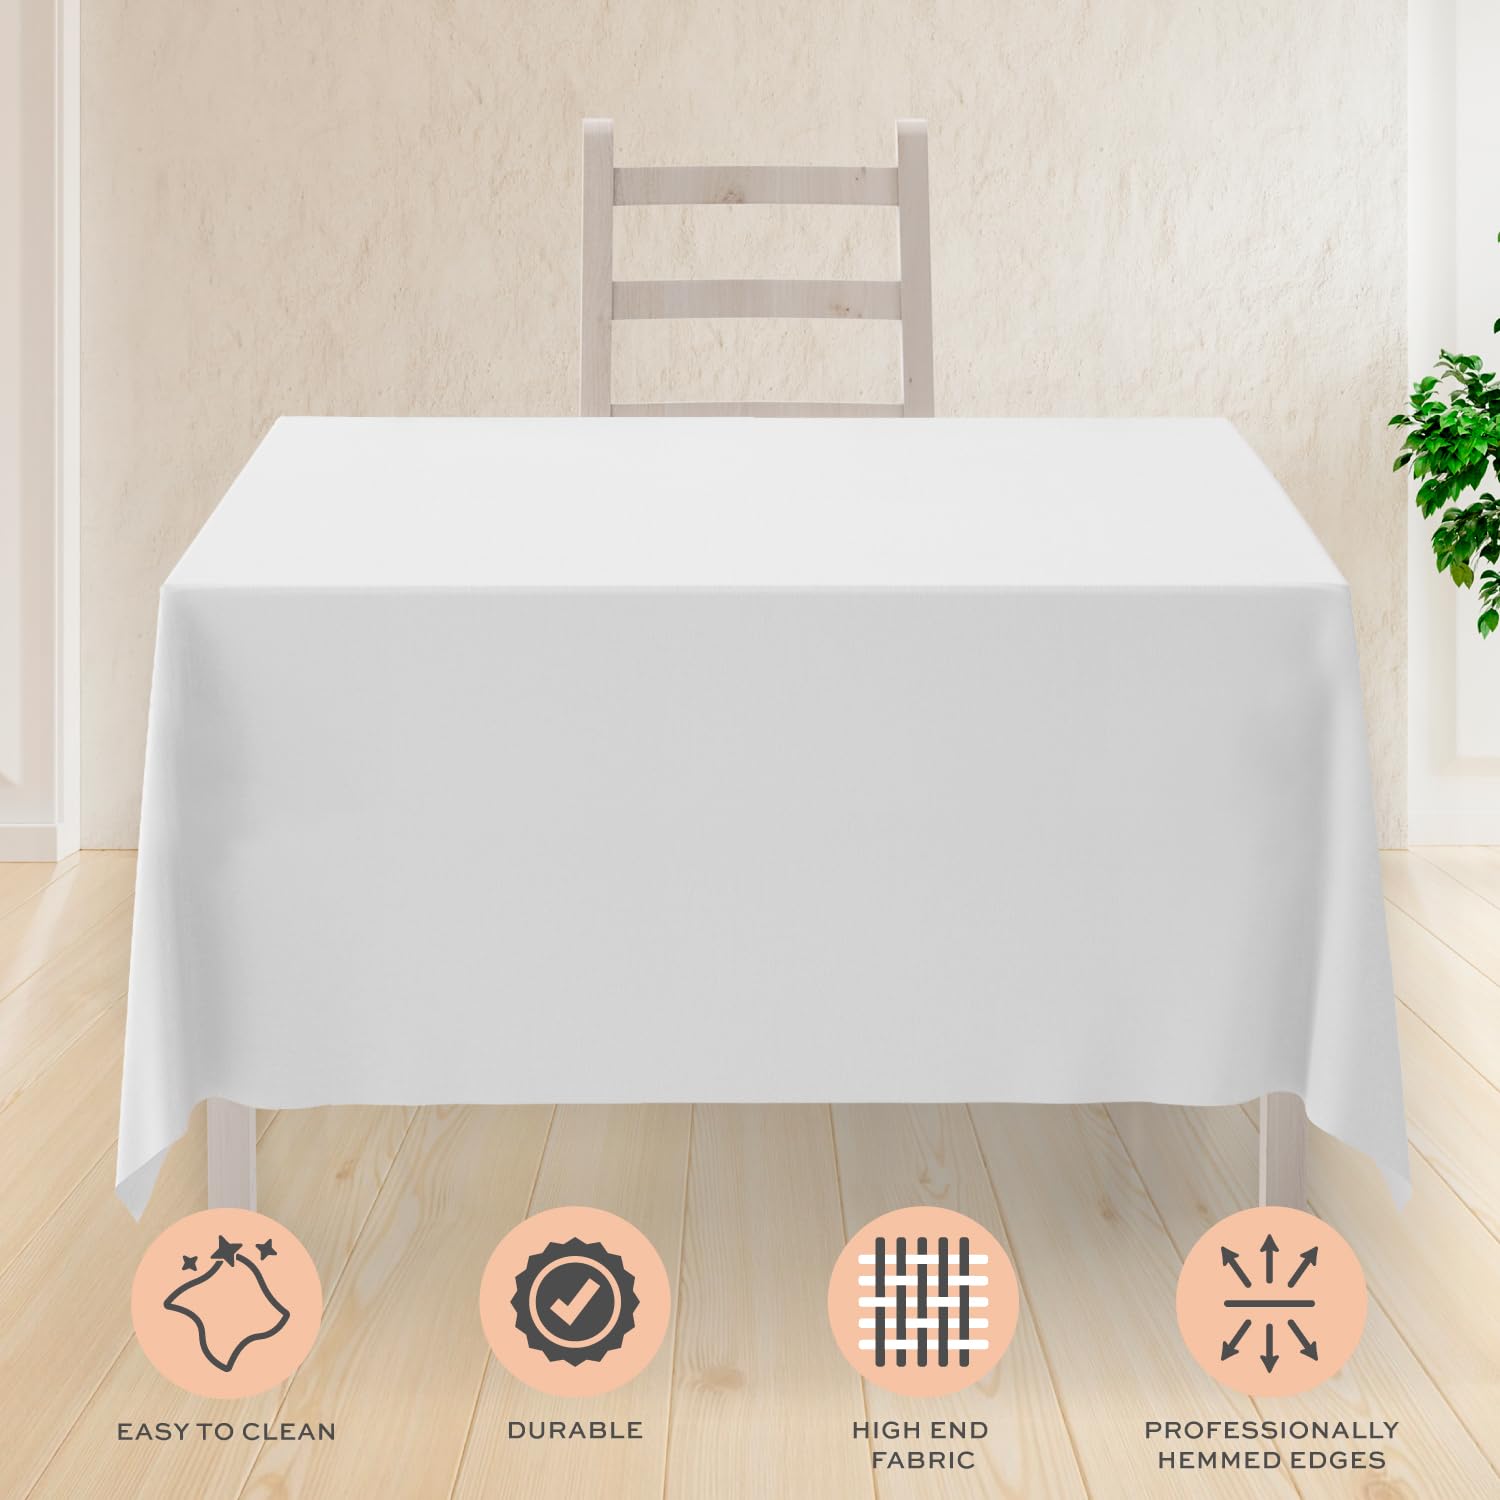 2 Square Tablecloth Covers 52x52 Inch | Table Cloths for Square or Round Table | 200 GSM Washable Wrinkle-Resistant Fabric for Weddings, Kitchen, Restaurant | White | 2 Pack  - Good